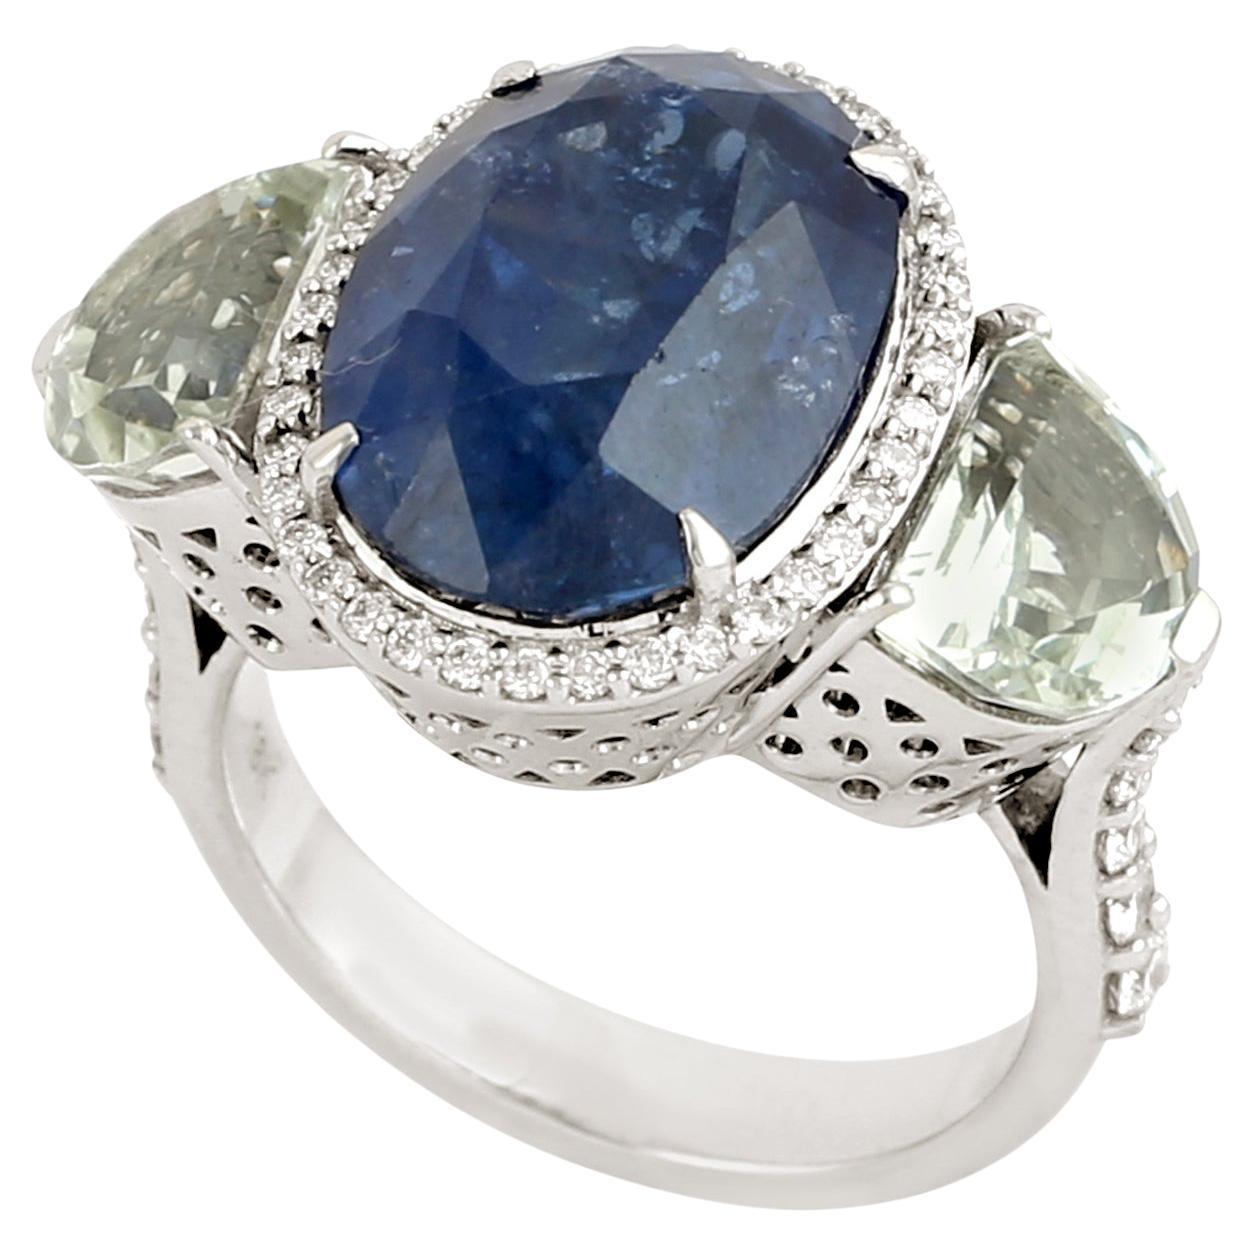 Oval Shaped Blue Sapphire Cocktail Ring With White Amethyst For Sale